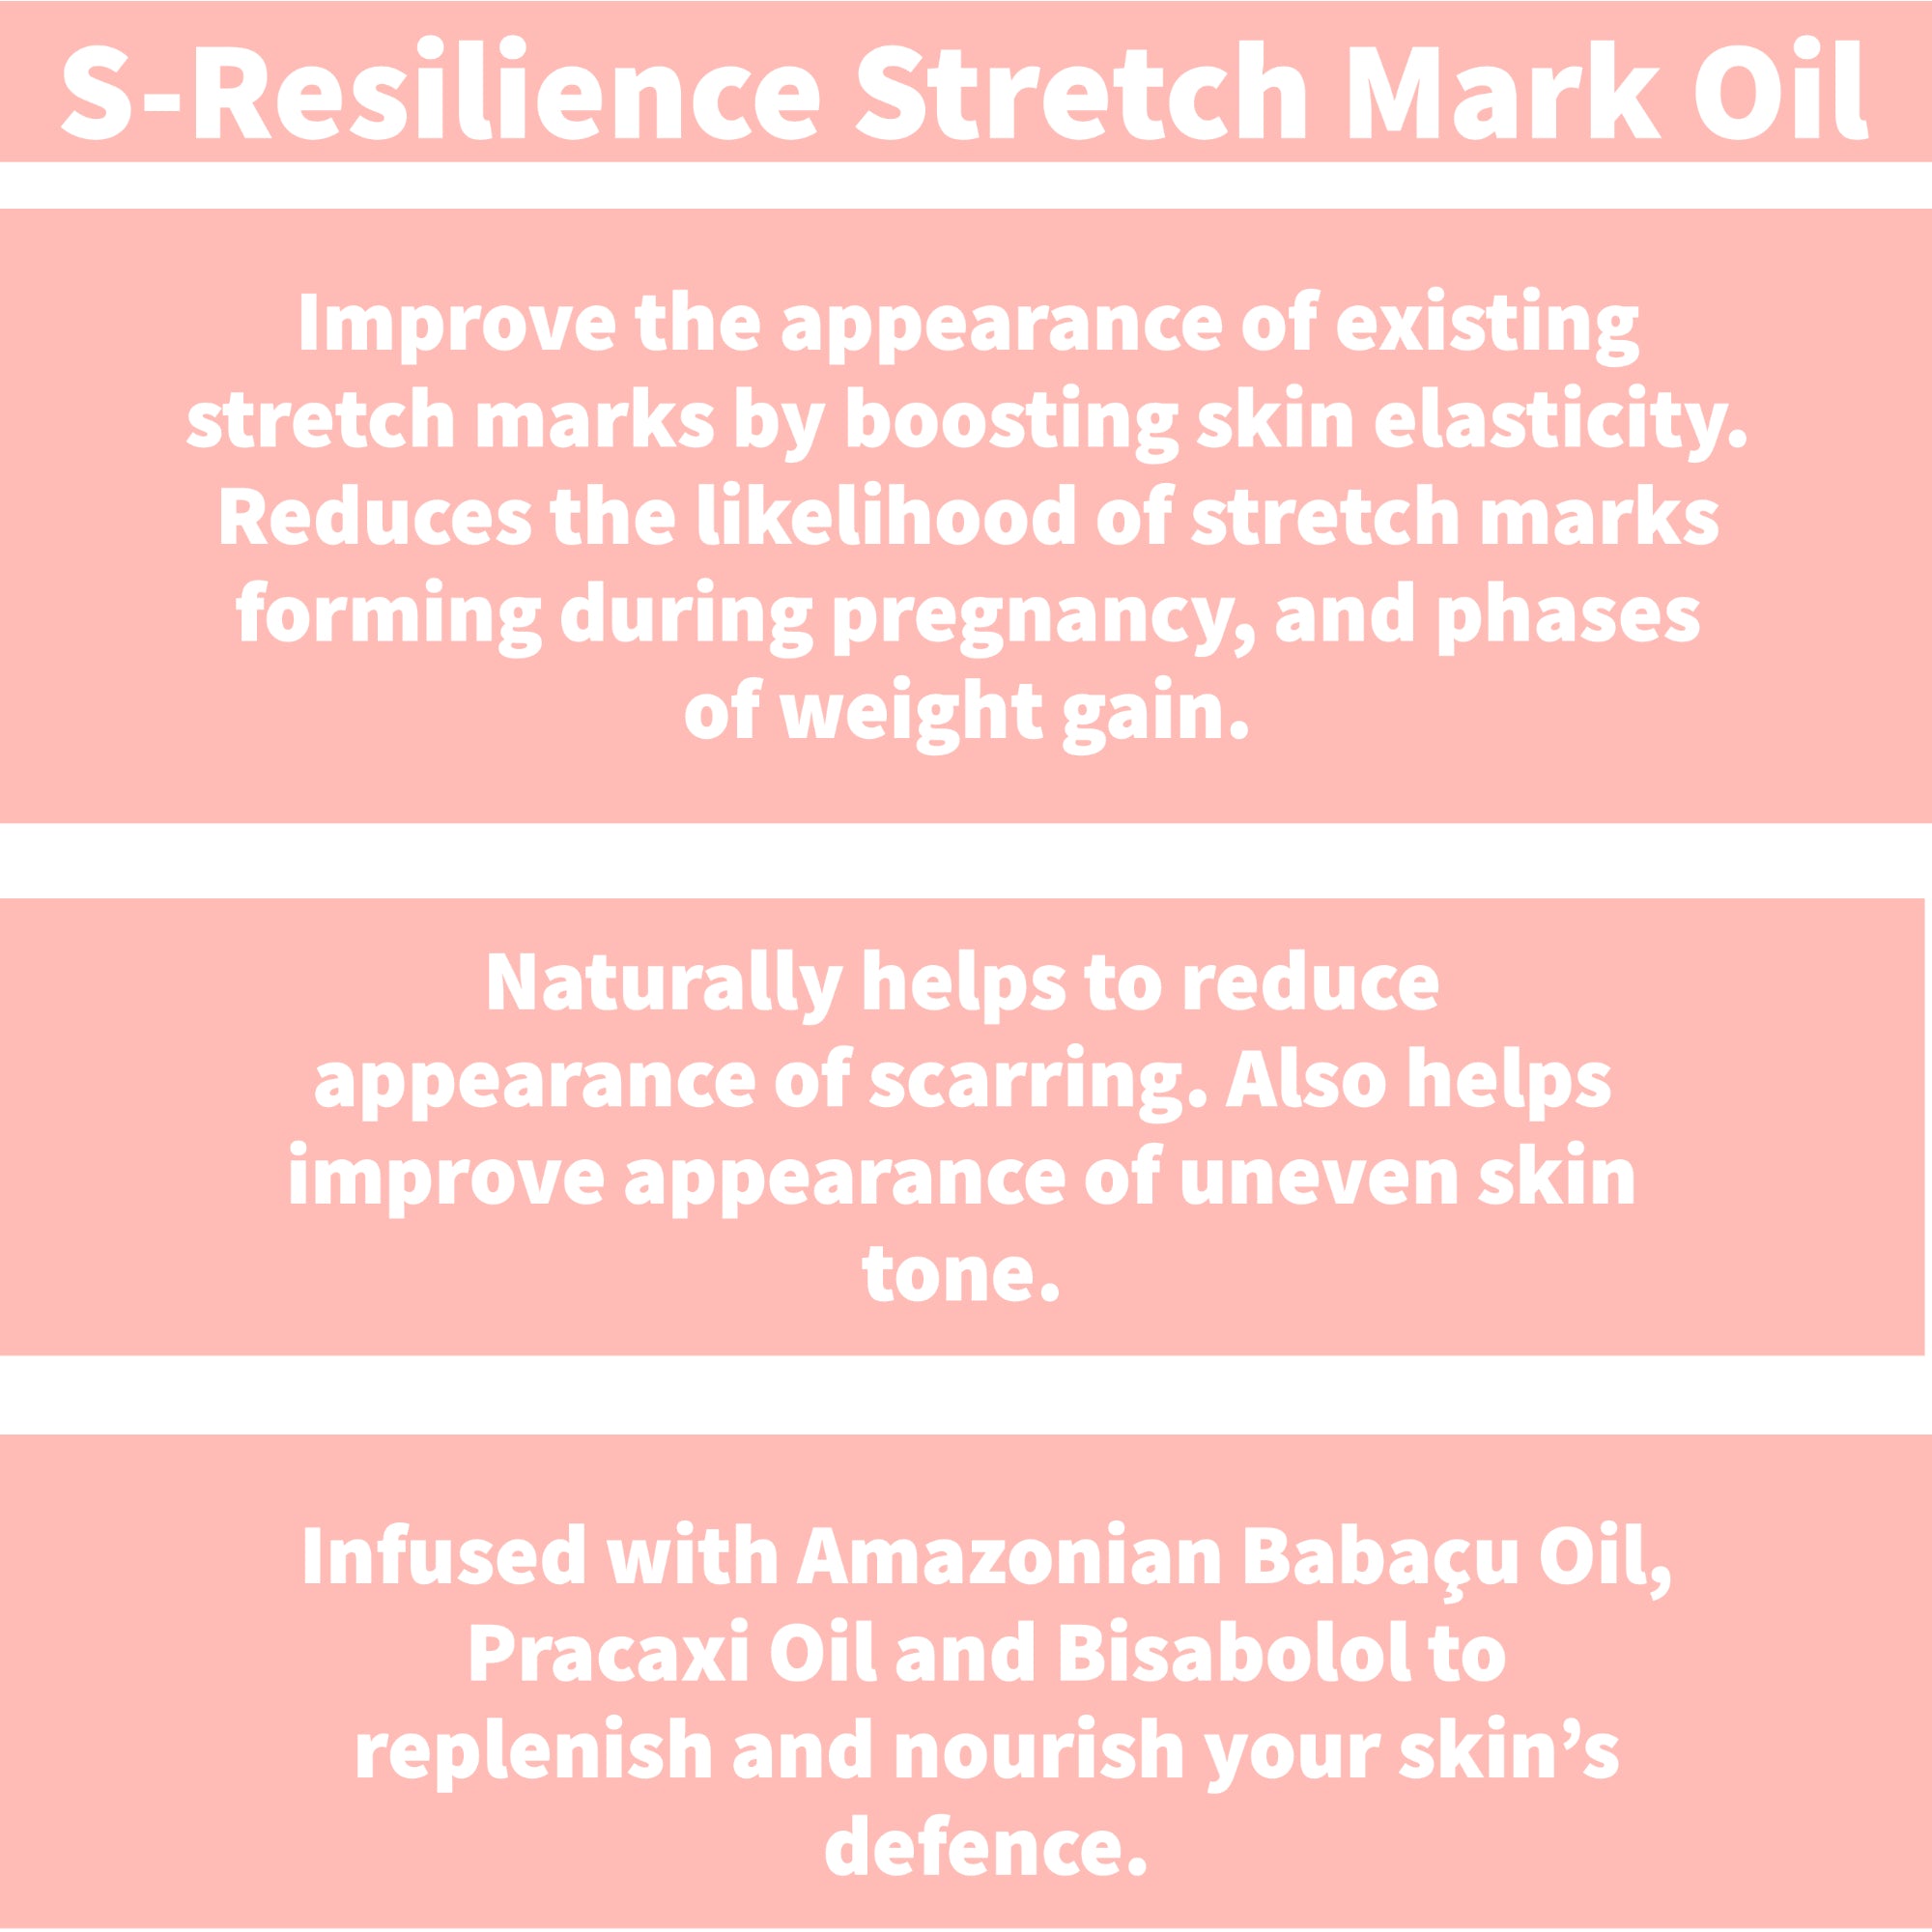 S-Resilience Stretch Marks Oil